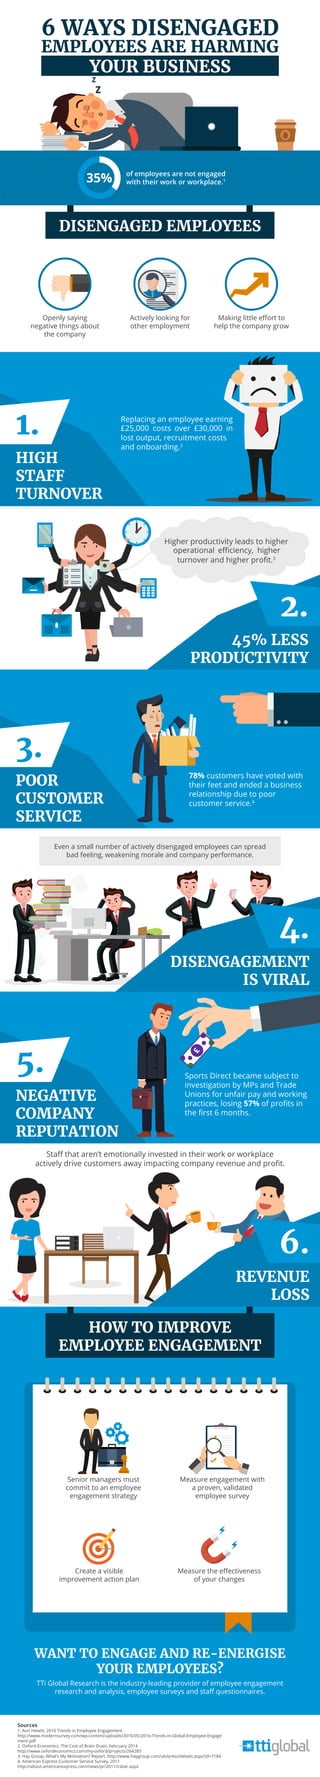 6 WAYS DISENGAGED
EMPLOYEES ARE HARMING
YOUR BUSINESS
DISENGAGED EMPLOYEES
Openly saying
negative things about
the company
HIGH
STAFF
TURNOVER
1.
POOR
CUSTOMER
SERVICE
3.
45% LESS
PRODUCTIVITY
Replacing an employee earning
lost output, recruitment costs
and onboarding.2
Even a small number of actively disengaged employees can spread
bad feeling, weakening morale and company performance.
78% customers have voted with
their feet and ended a business
relationship due to poor
customer service.4
NEGATIVE
COMPANY
REPUTATION
5.
Actively looking for
other employment
Making little eﬀort to
help the company grow
2.
DISENGAGEMENT
IS VIRAL
4.
Staﬀ that aren’t emotionally invested in their work or workplace
actively drive customers away impacting company revenue and proﬁt.
REVENUE
LOSS
6.
HOW TO IMPROVE
EMPLOYEE ENGAGEMENT
Create a visible
improvement action plan
WANT TO ENGAGE AND RE-ENERGISE
YOUR EMPLOYEES?
TTi Global Research is the industry-leading provider of employee engagement
research and analysis, employee surveys and staﬀ questionnaires.
Senior managers must
commit to an employee
engagement strategy
Sources
1. Aon Hewitt, 2016 Trends in Employee Engagement
http://www.modernsurvey.com/wp-content/uploads/2016/05/2016-Trends-in-Global-Employee-Engage
ment.pdf
2. Oxford Economics, The Cost of Brain Drain, February 2014
http://www.oxfordeconomics.com/my-oxford/projects/264283
3. Hay Group, What’s My Motivation? Report, http://www.haygroup.com/uk/press/details.aspx?id=7184
4. American Express Customer Service Survey, 2011
http://about.americanexpress.com/news/pr/2011/csbar.aspx
Higher productivity leads to higher
turnover and higher proﬁt.3
of employees are not engaged
with their work or workplace.135%
Measure engagement with
a proven, validated
employee survey
Measure the eﬀectiveness
of your changes
£
Sports Direct became subject to
investigation by MPs and Trade
Unions for unfair pay and working
practices, losing 57% of proﬁts in
the ﬁrst 6 months.
£25,000 costs over £30,000 in
operational efficiency, higher
 